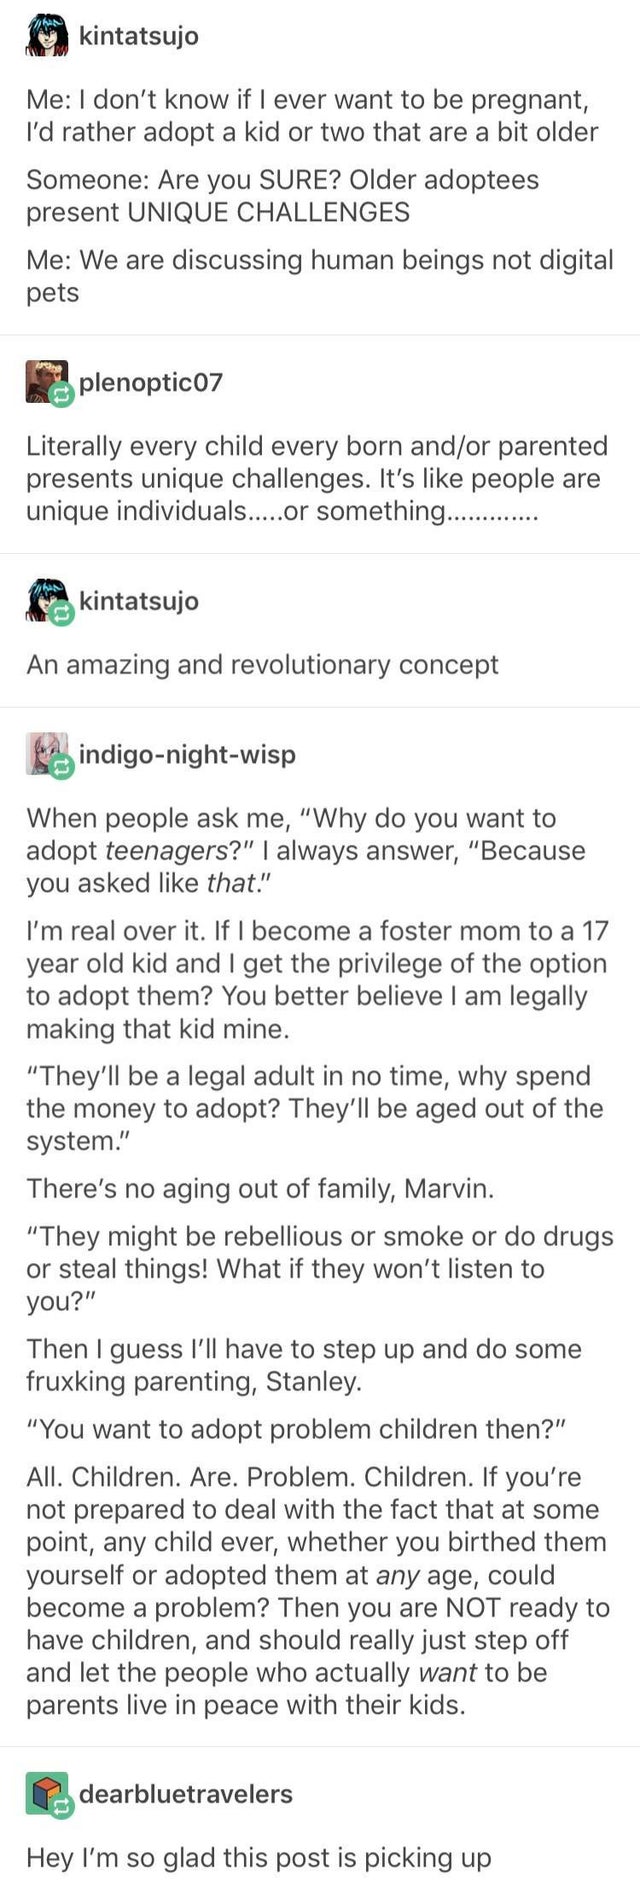 funny posts - I kintatsujo Me I don't know if I ever want to be pregnant, I'd rather adopt a kid or two that are a bit older Someone Are you Sure? Older adoptees present Unique Challenges Me We are discussing human beings not digital pets plenoptico7 Lite